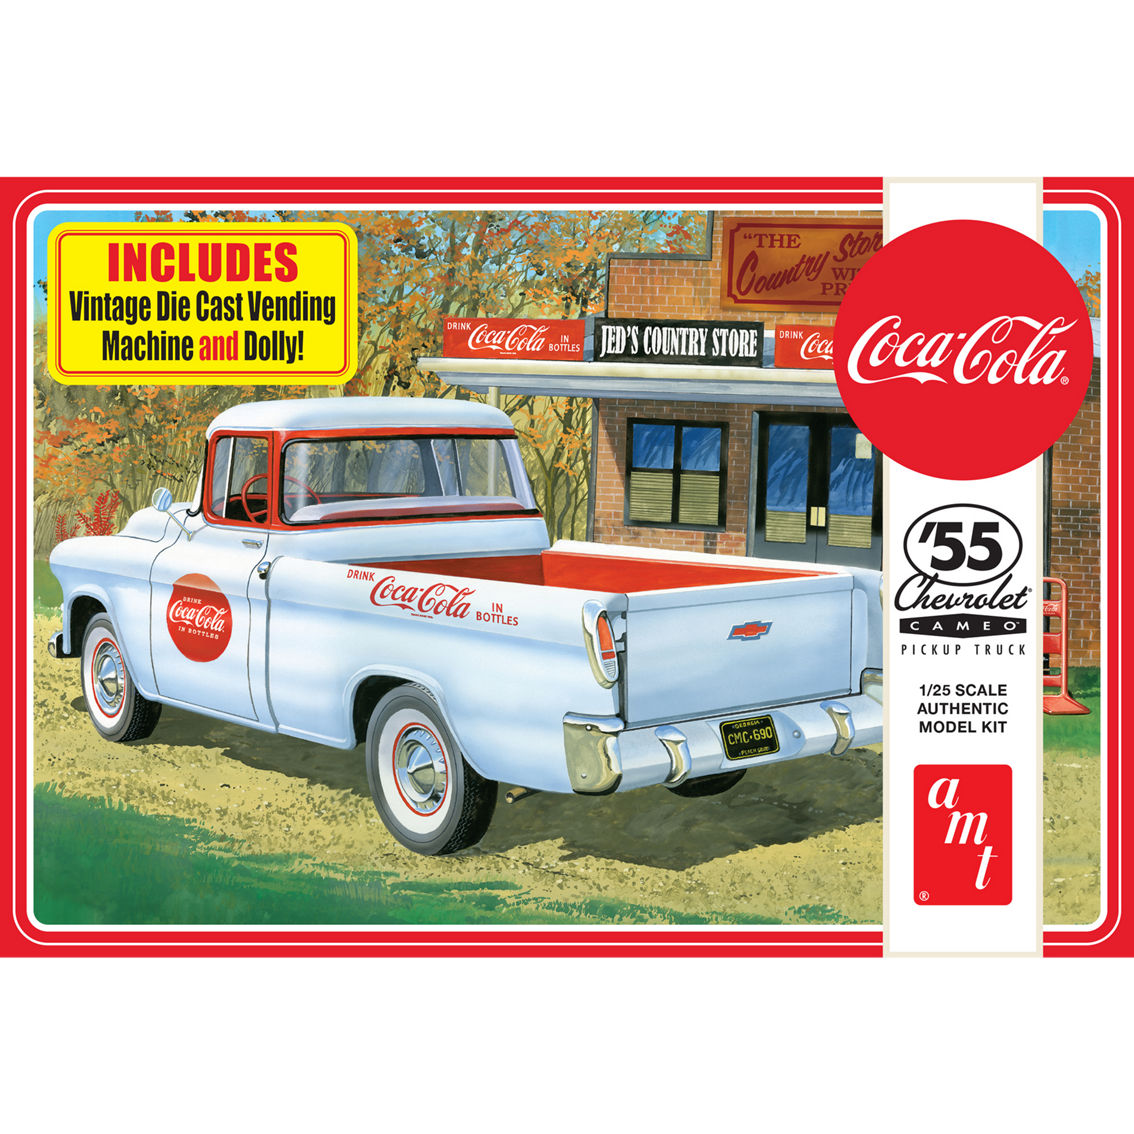 AMT 1955 Chevy Cameo Pickup (Coca-Cola) 1:25 Scale Model Kit - Image 5 of 7